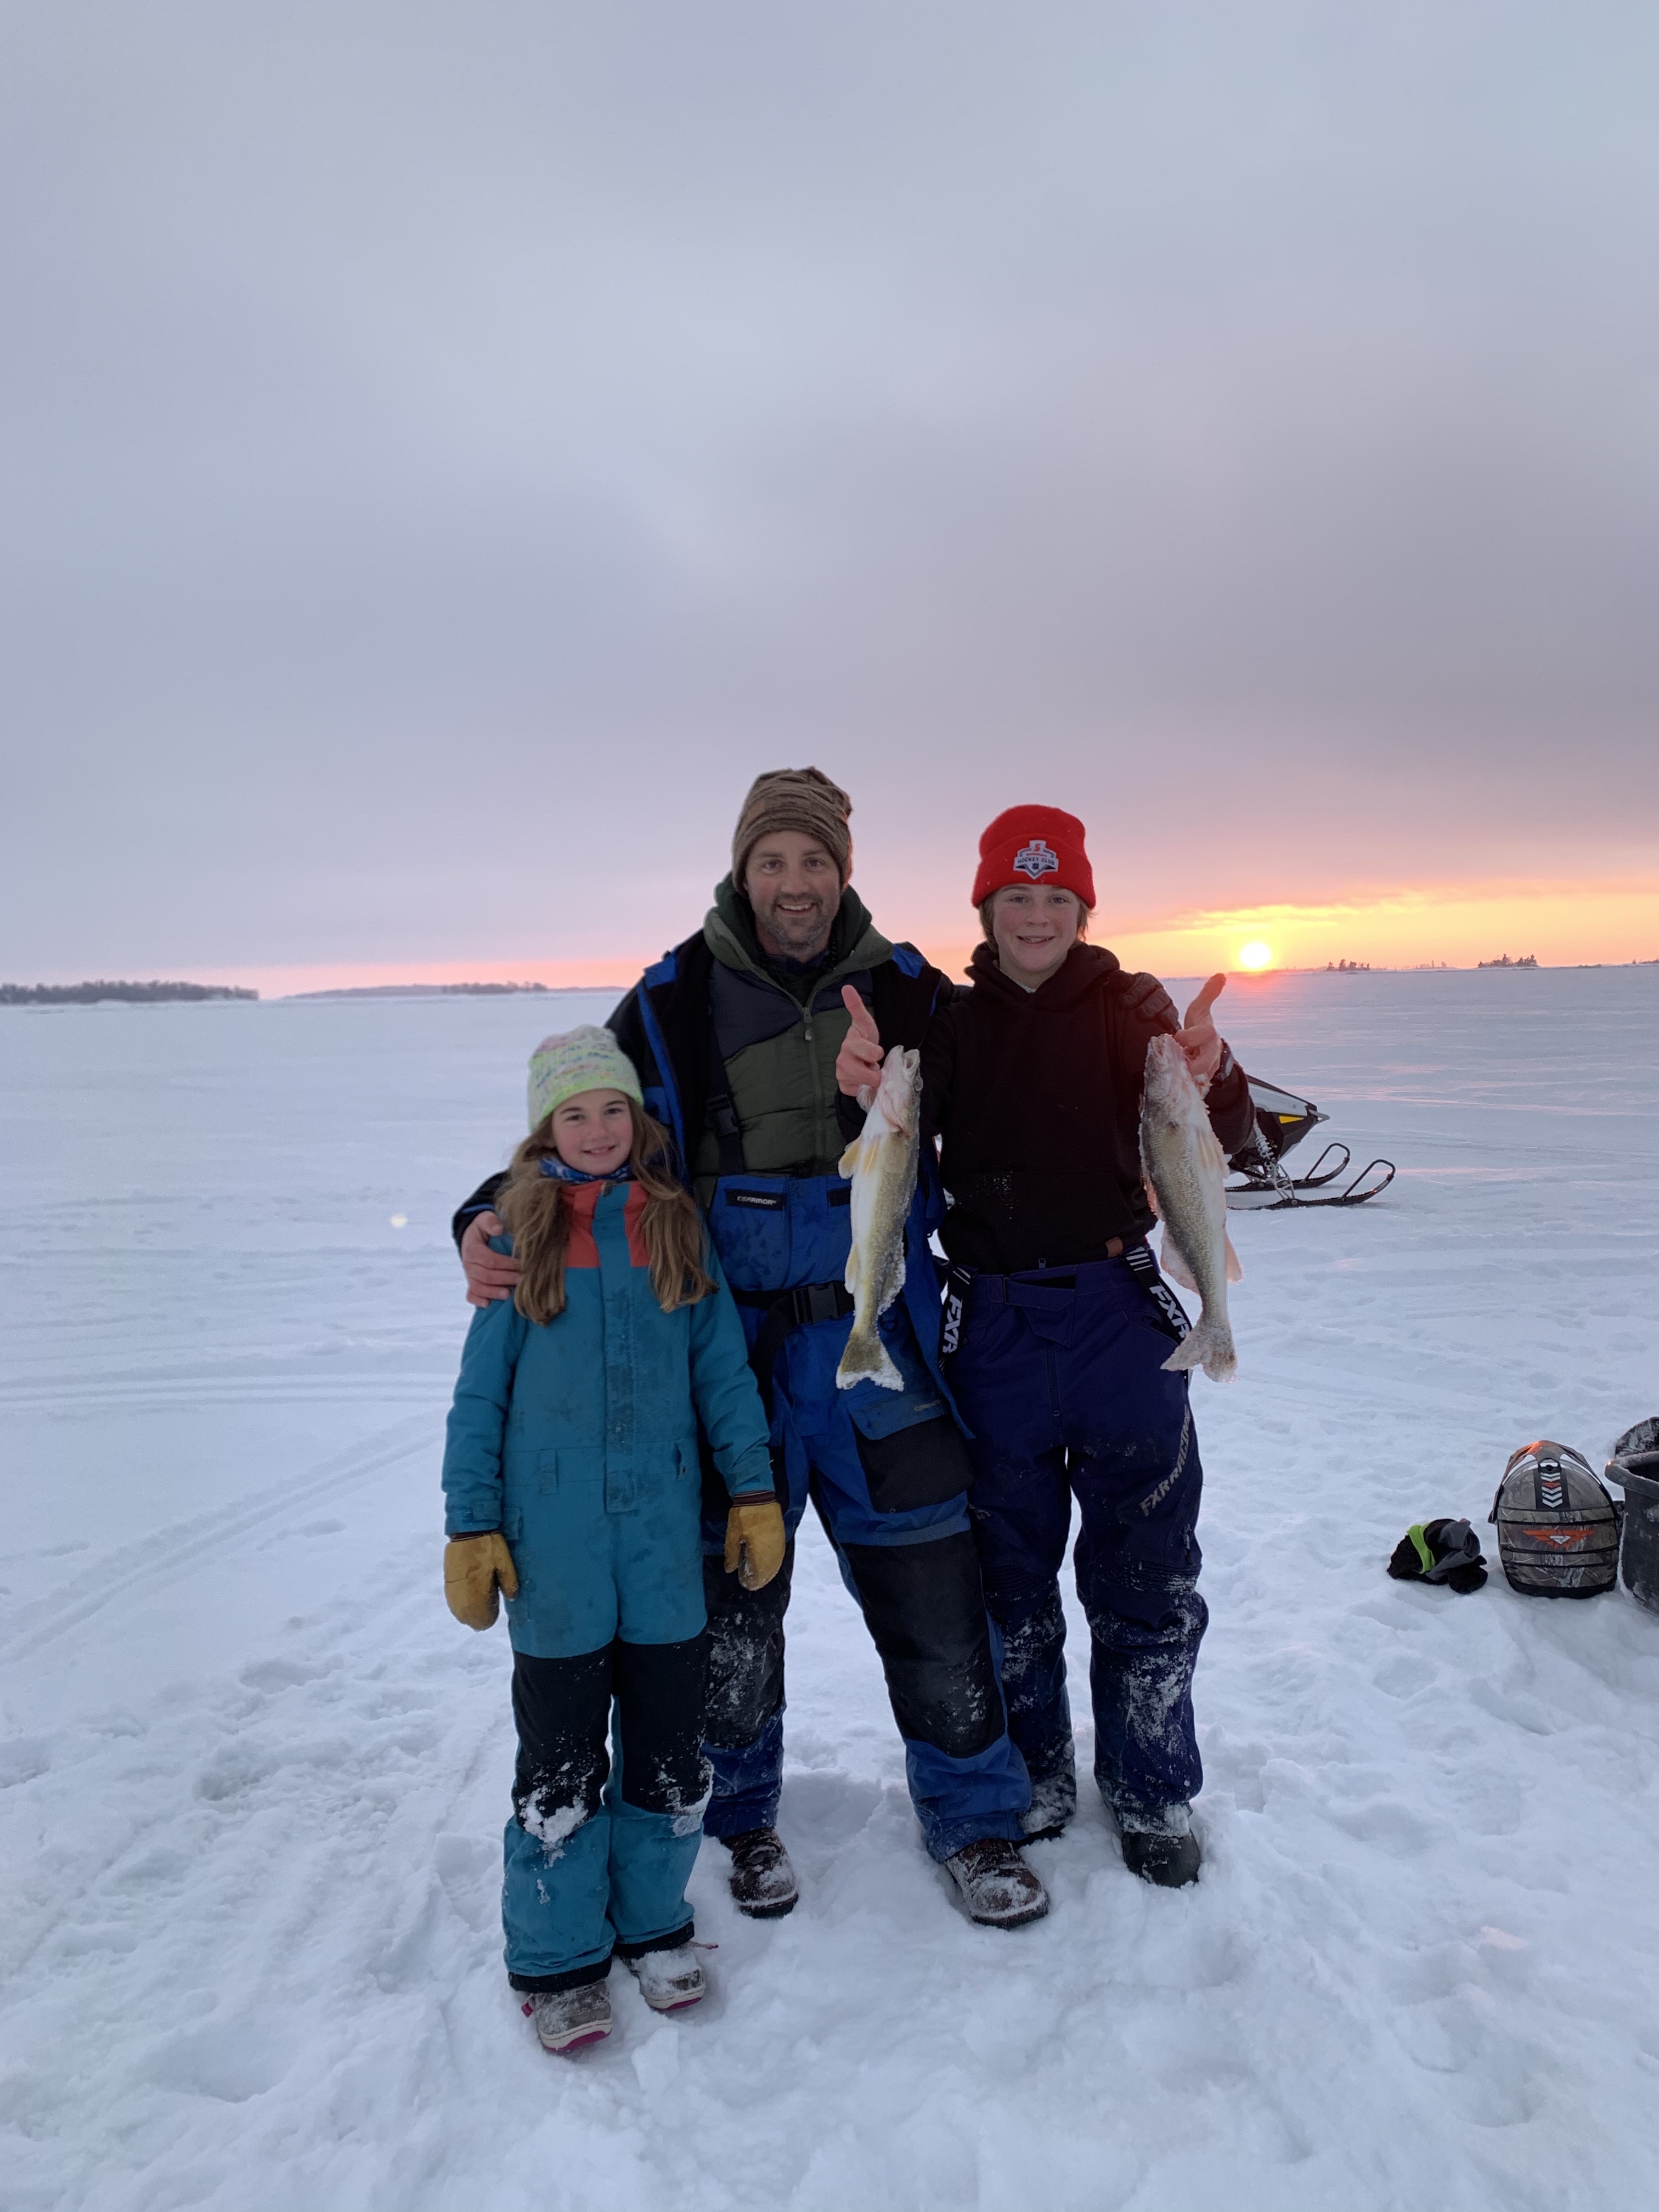 Ice fishing is an ideal activity for families